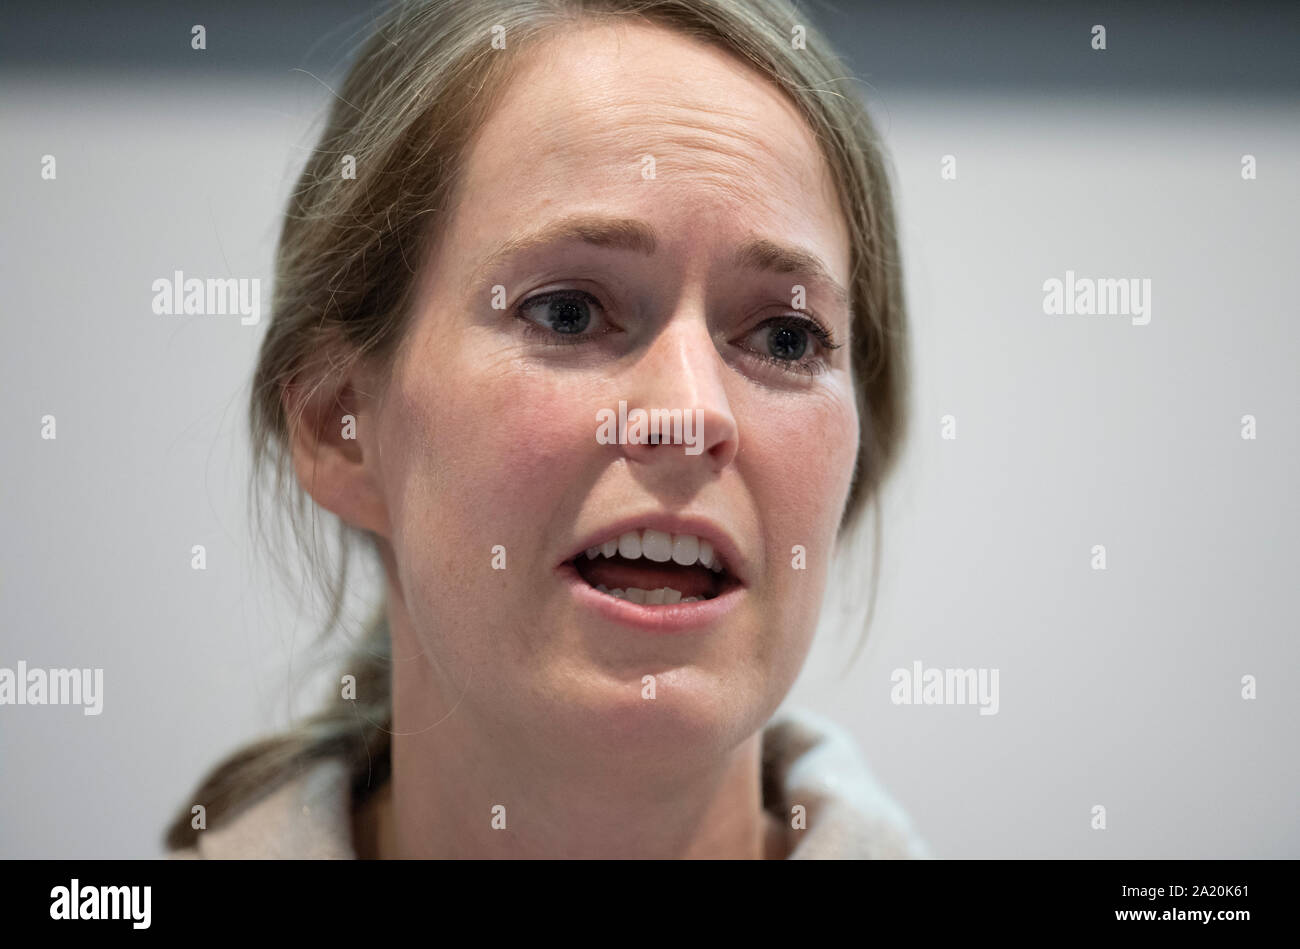 Manchester, UK. 30th September 2019. Georgia Berry, Chief of Staff to OVO Energy's CEO and founder, speaks at the Zeroc Campaign fringe event ZeroC: How market based mechanisms can get us to Net Zero, on day two of the Conservative Party Conference in Manchester. Credit: Russell Hart/Alamy Live News. Stock Photo